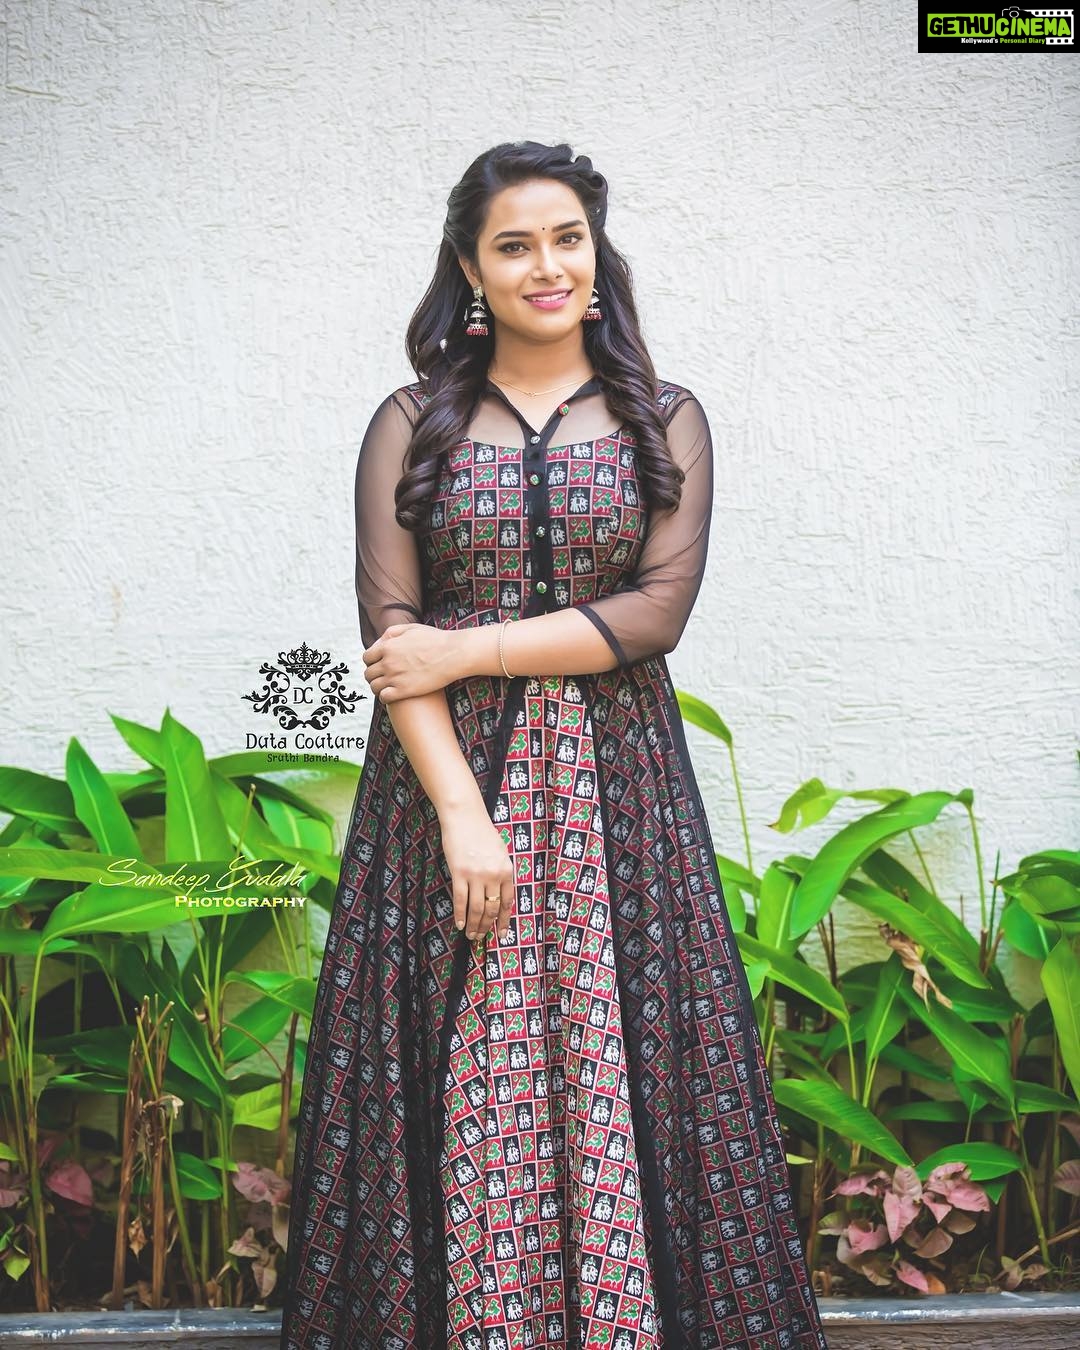 Hari Teja Instagram - Just love the colour ❤️ Wearing @althea.krishna 🥰🥰 Thank u for the beautiful outfit ....🙂🙂 Styled by: @vid_vidya PC: @apicbyvenky 😃